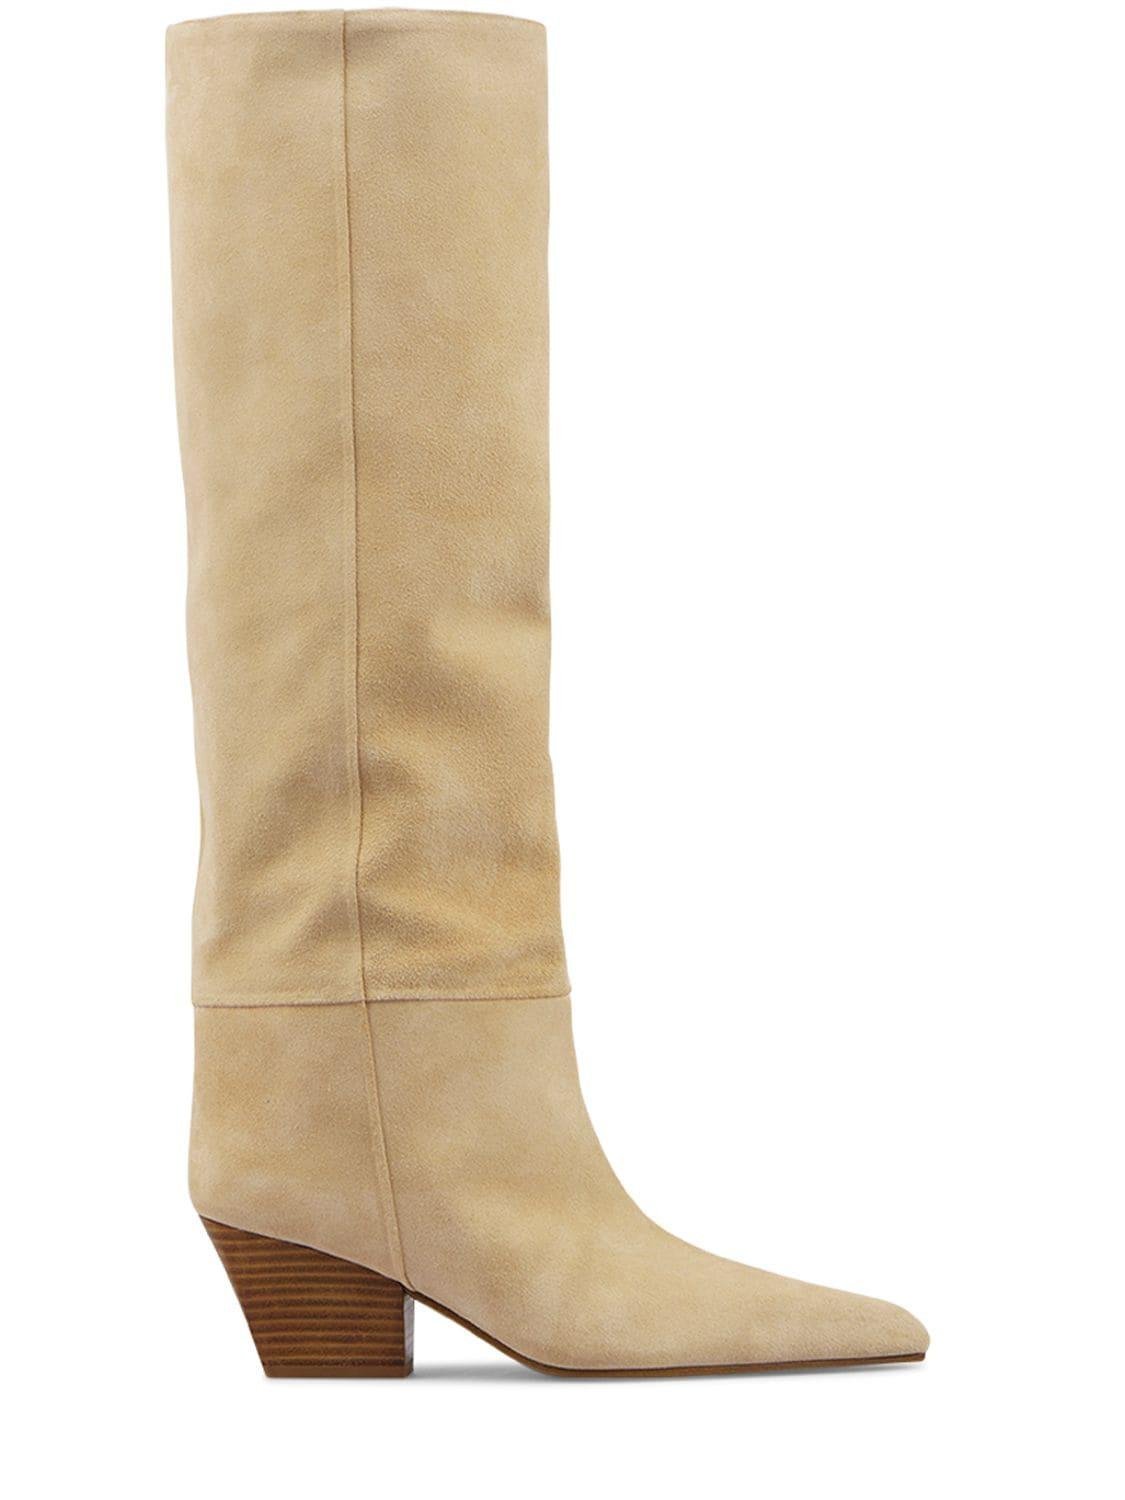 60mm Jane Suede Tall Boots by PARIS TEXAS